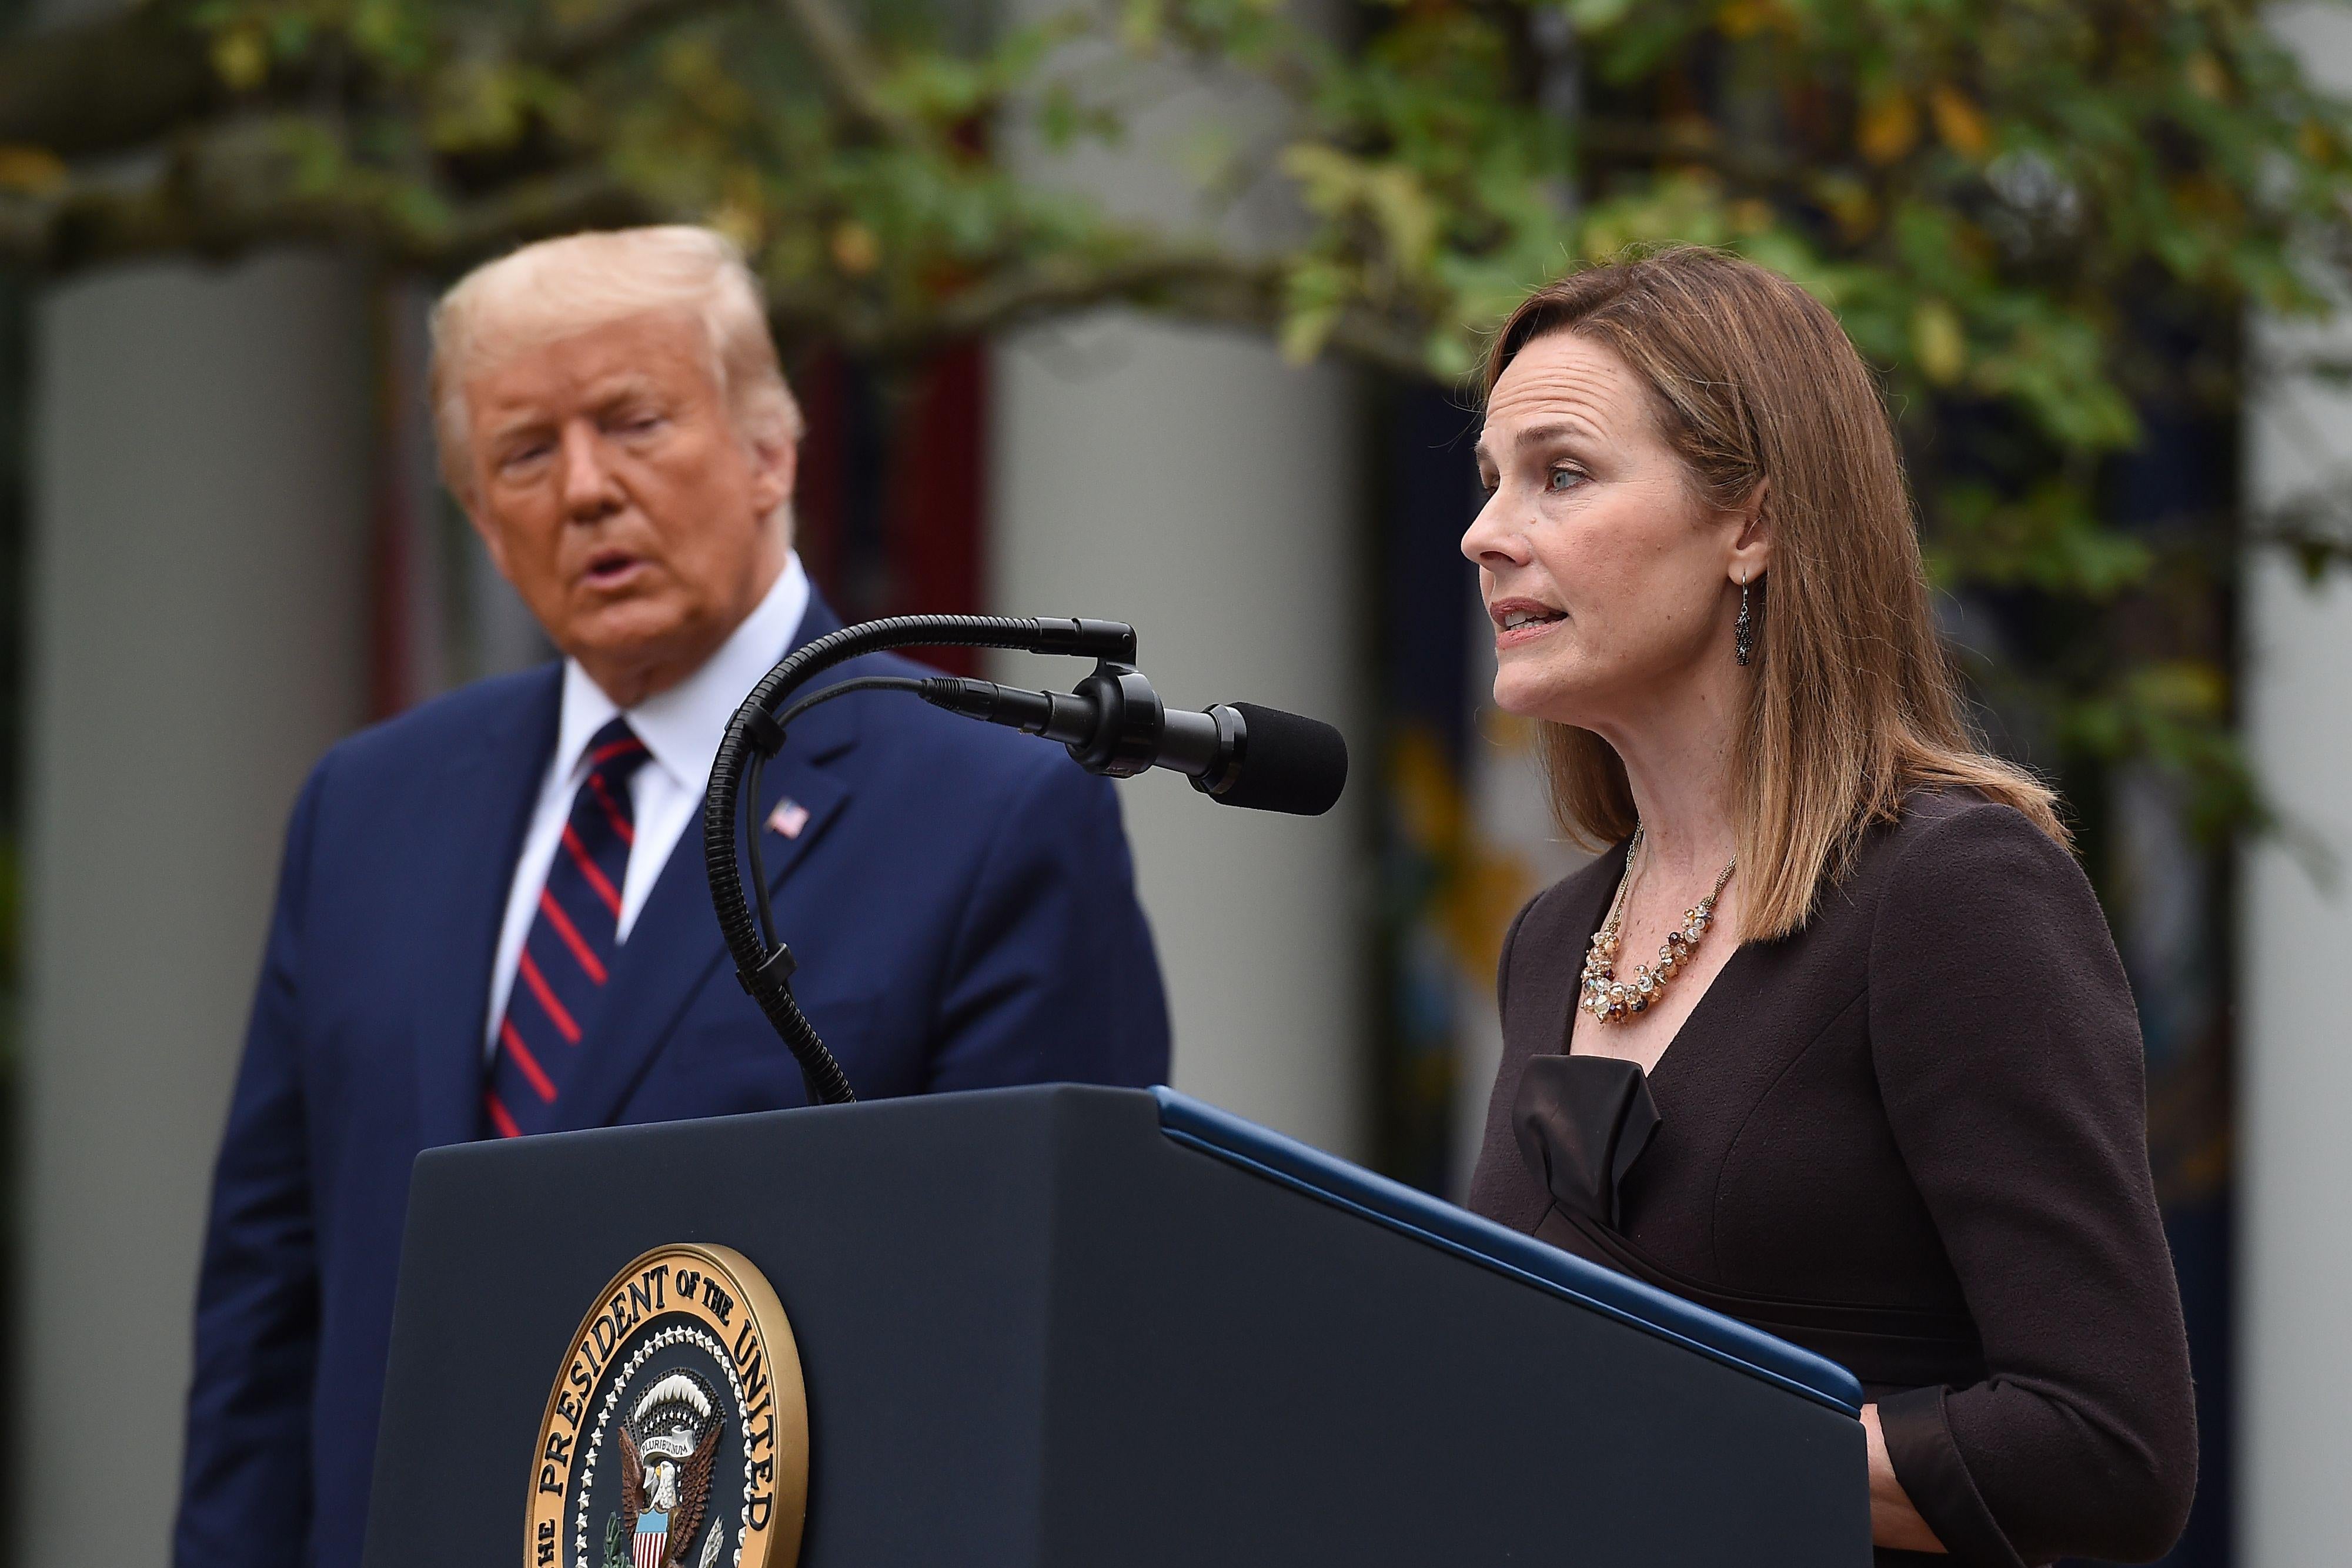 Amy Coney Barrett speaks at a lectern while Trump watches from the side.